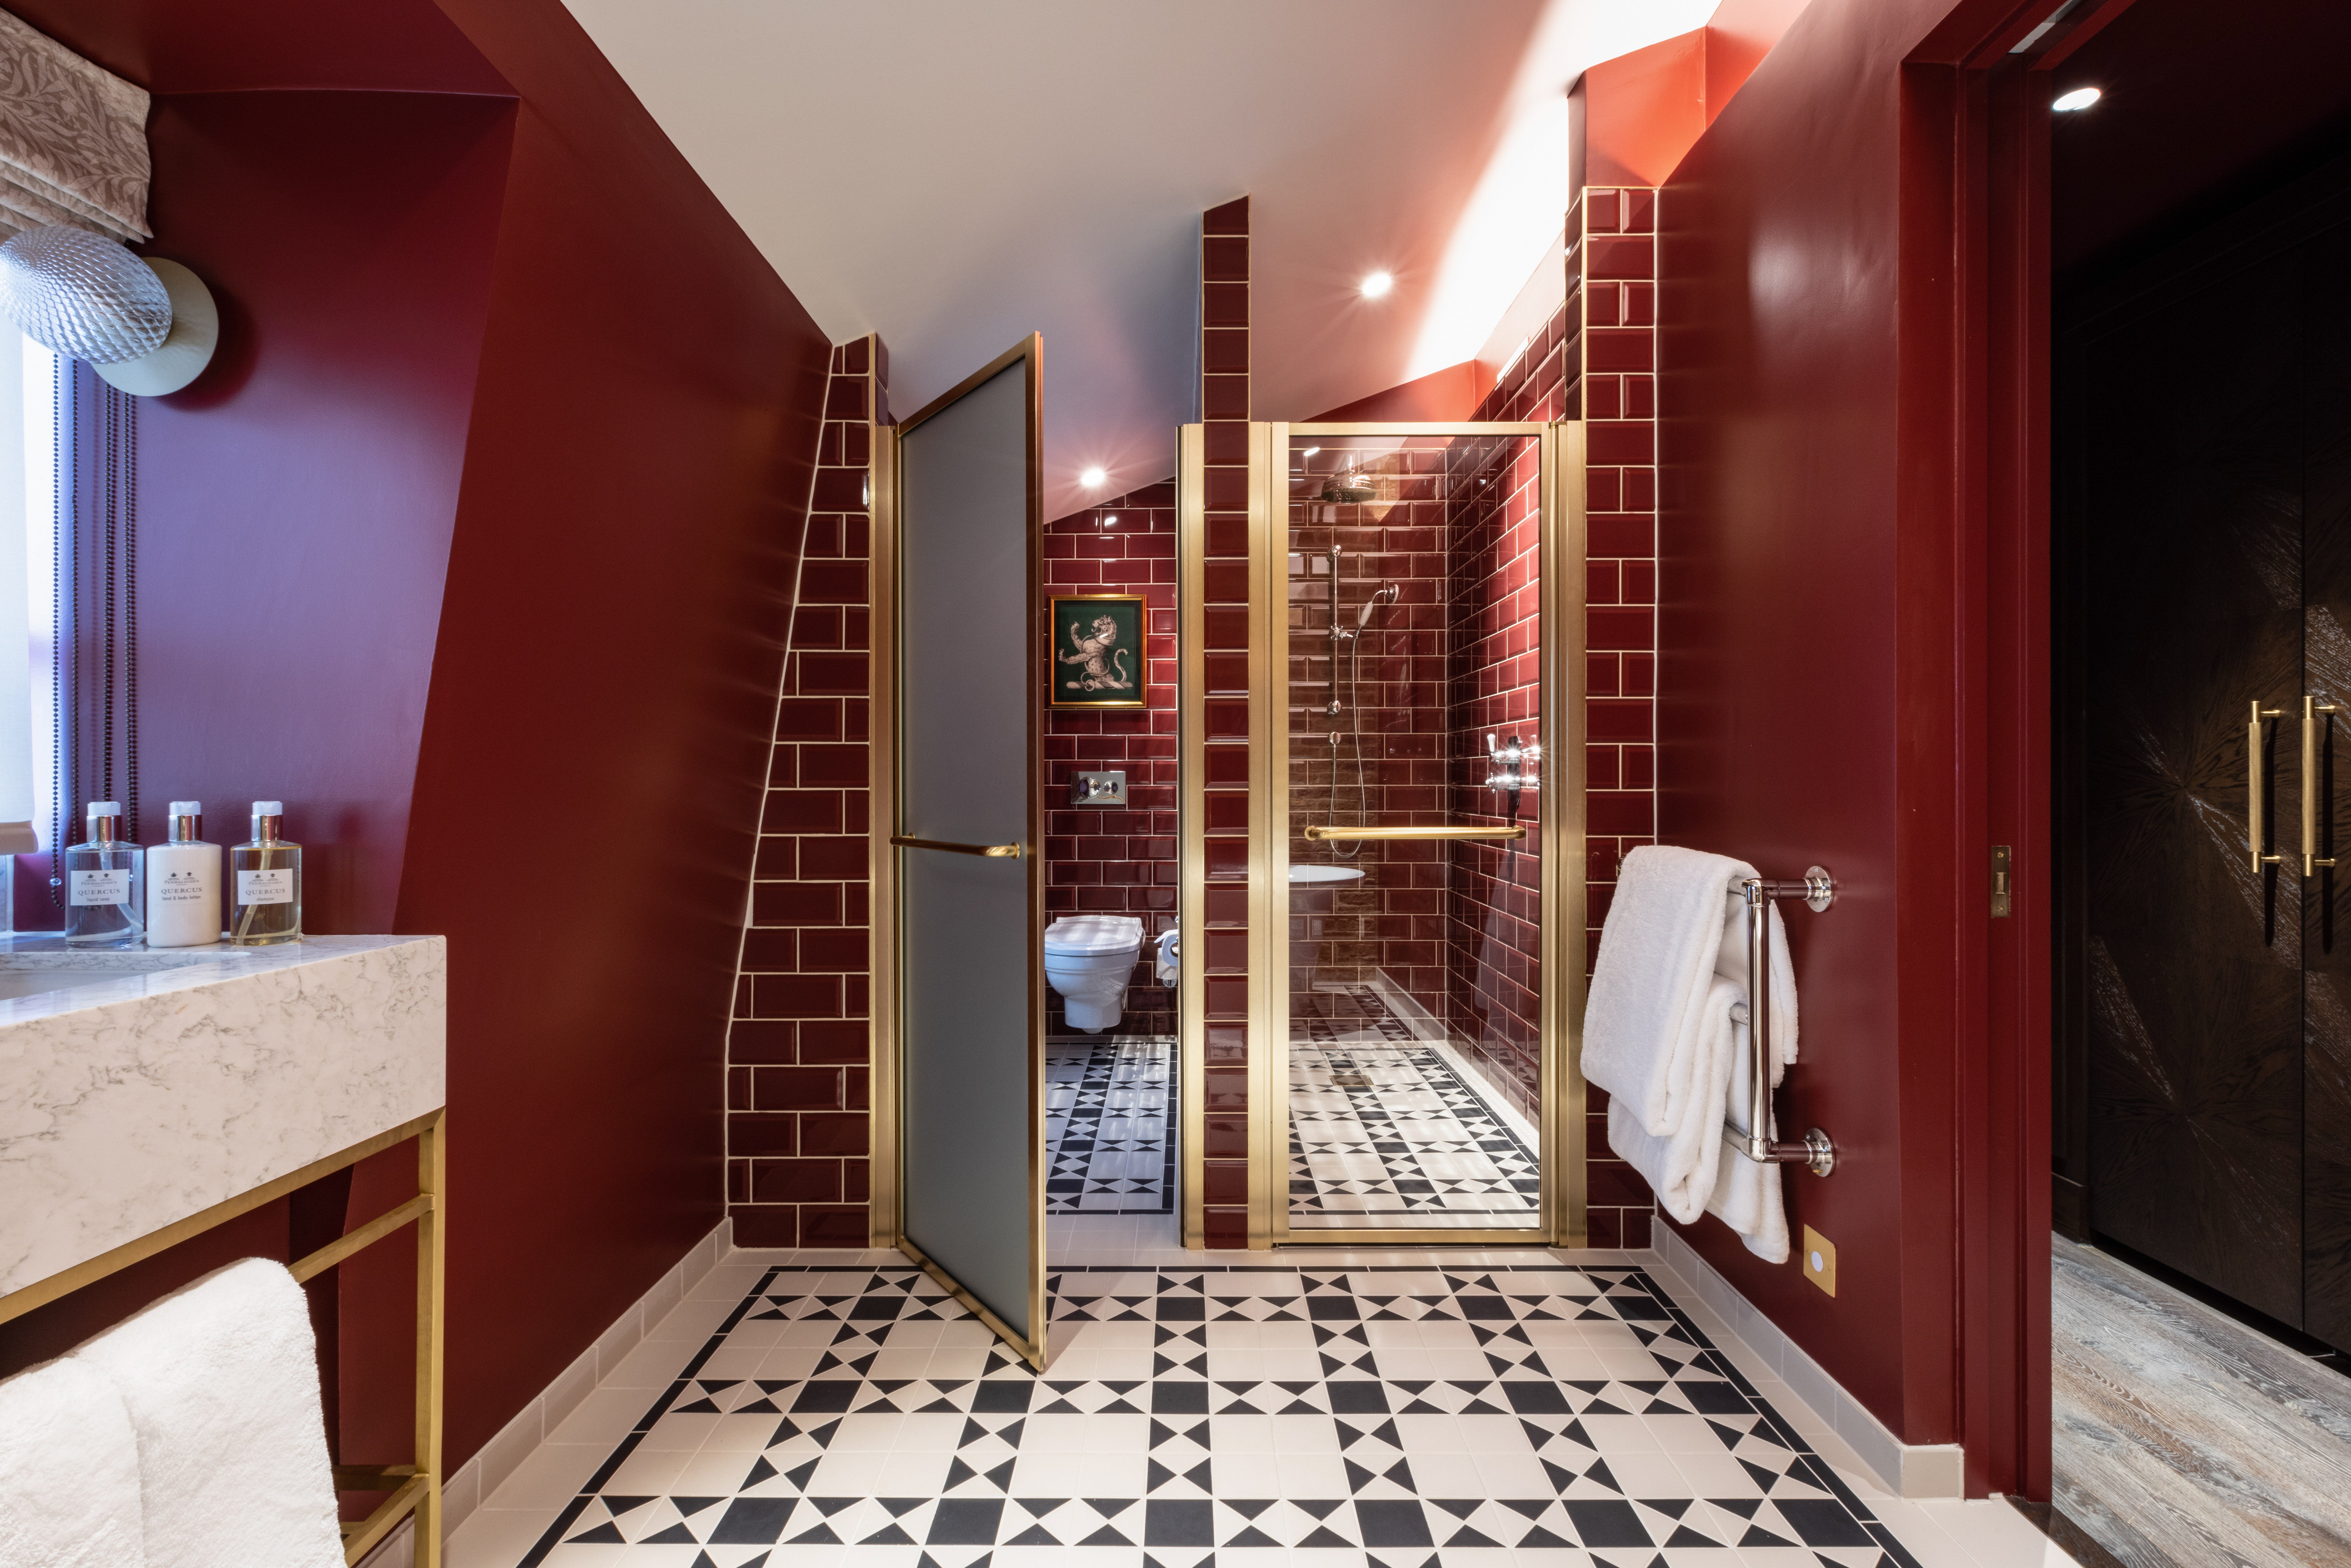 Bathrooms are furnished with Penhaligons toiletries